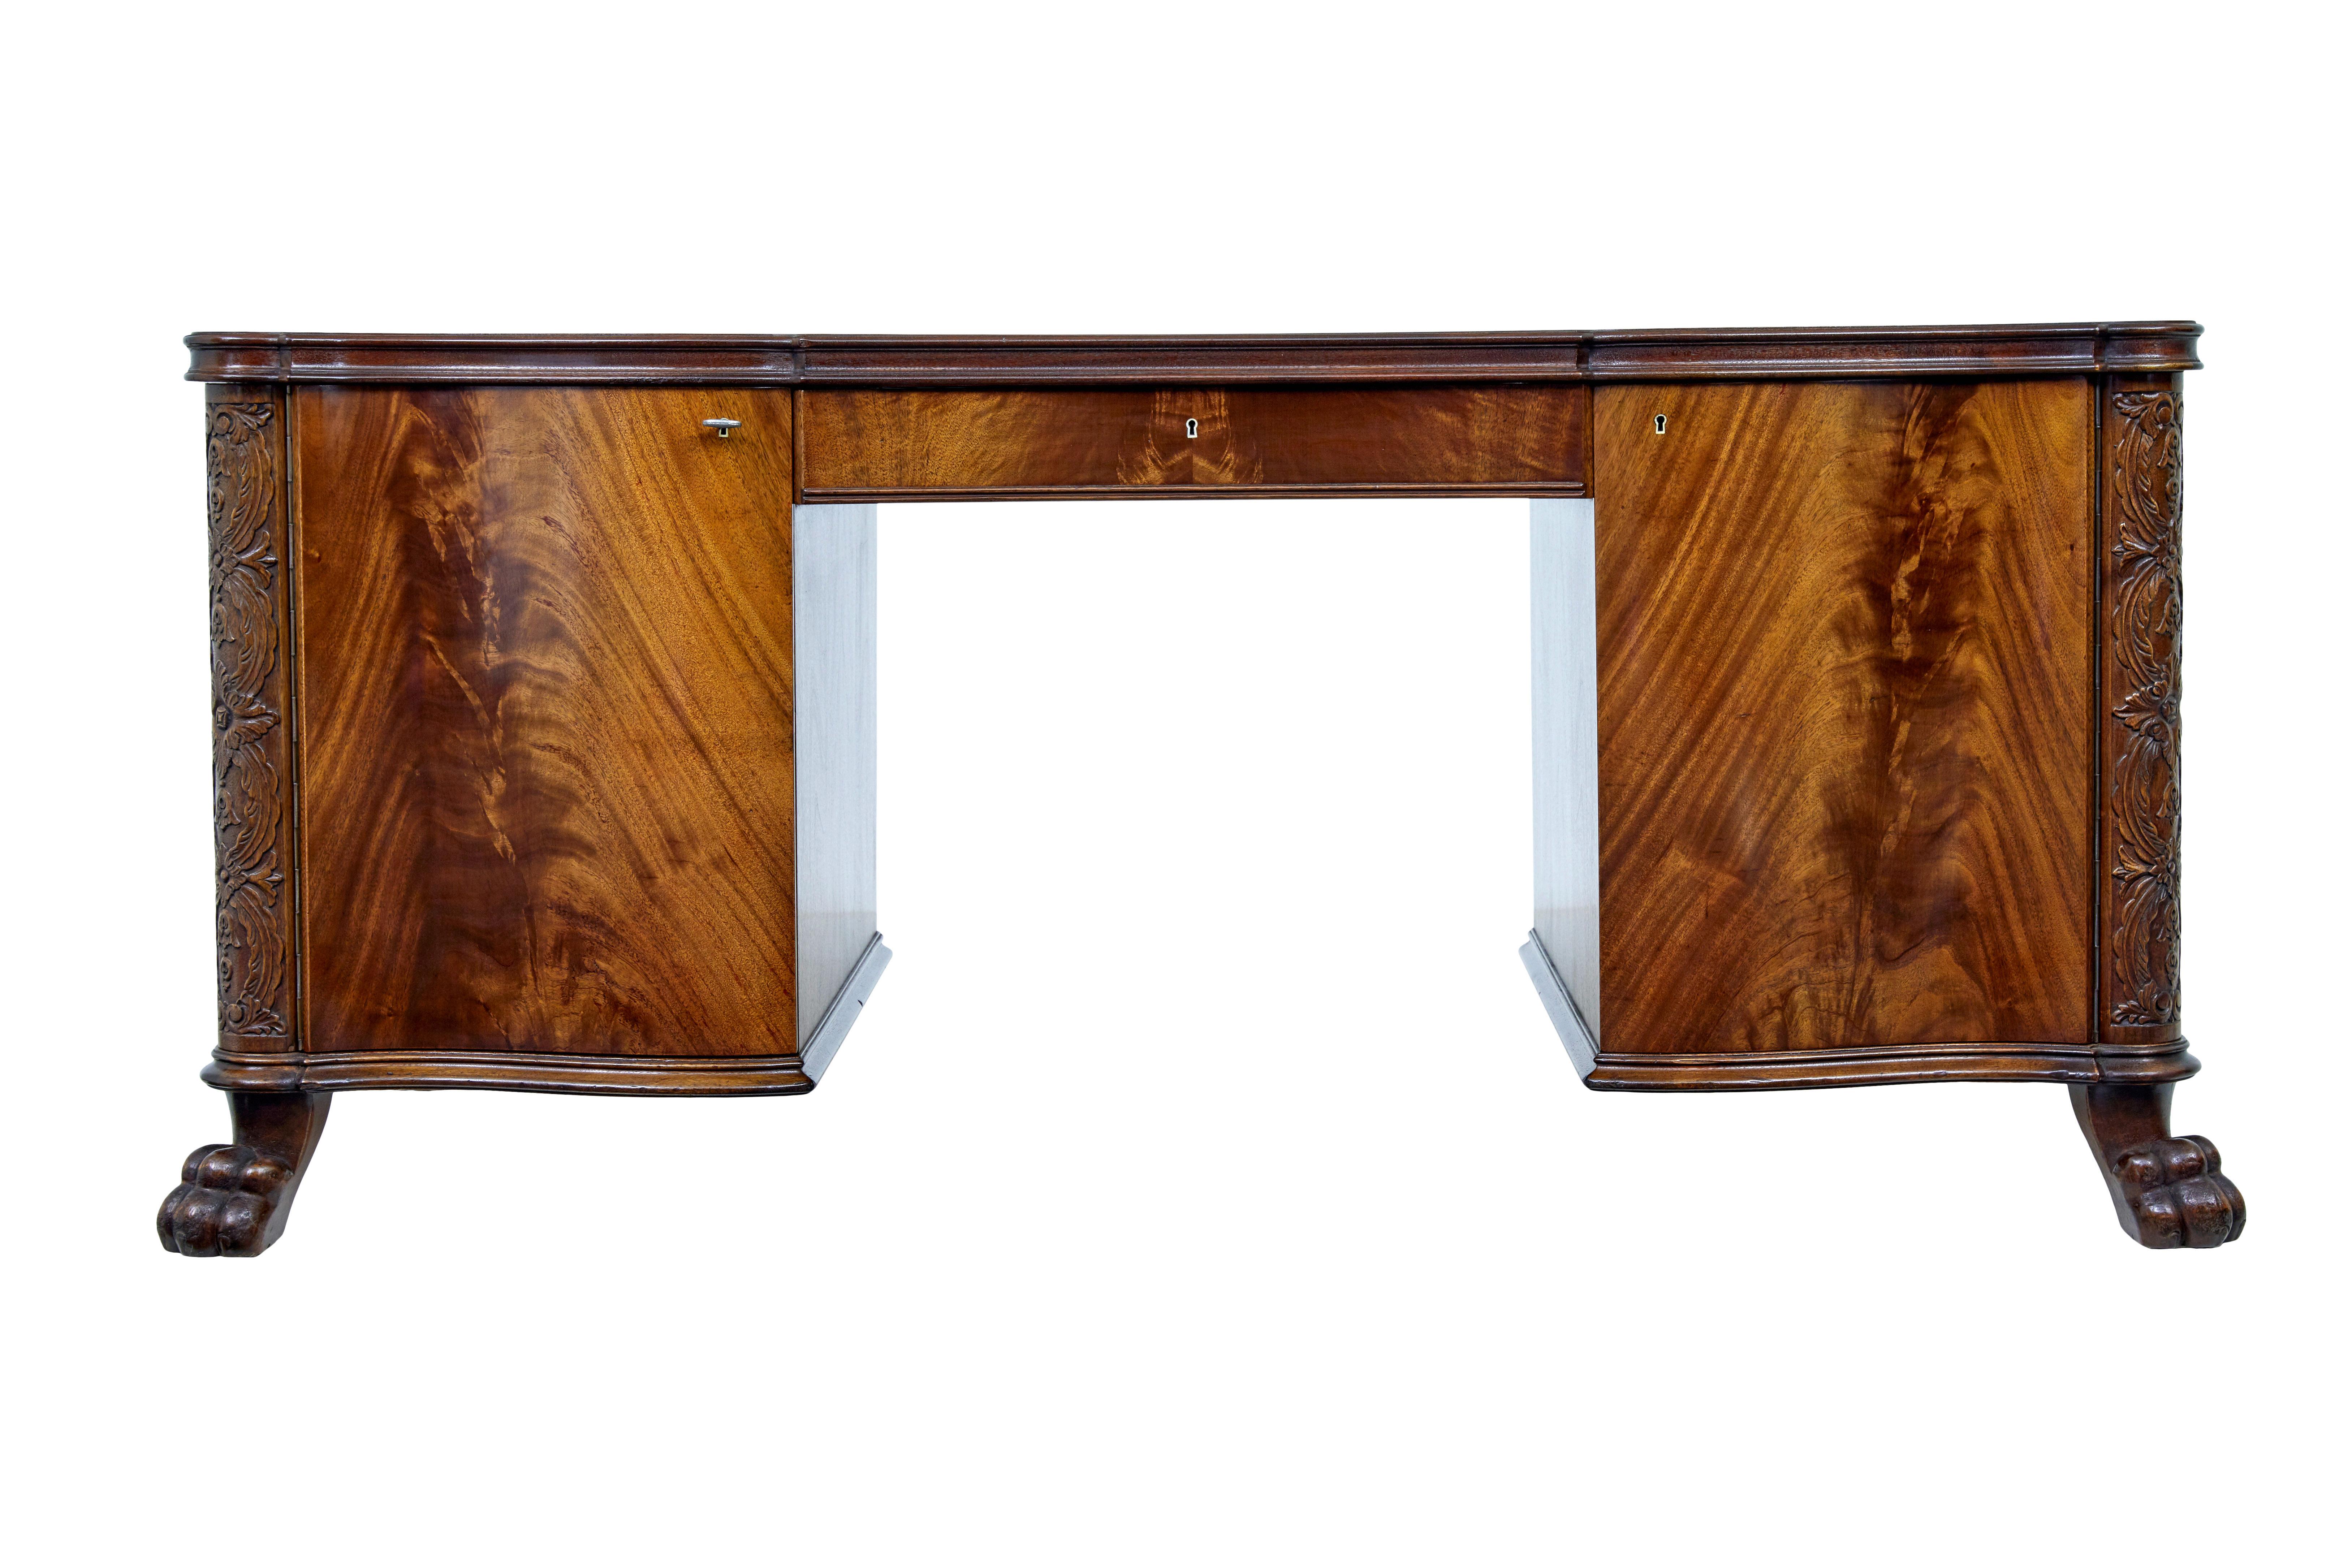 Mid 20th century carved mahogany swedish desk circa 1947.

We are pleased to offer this superb quality desk, which is stamped proving that it was part of the swedish royal family's inventory and a makers date of 1947.

Shaped top which matched flame